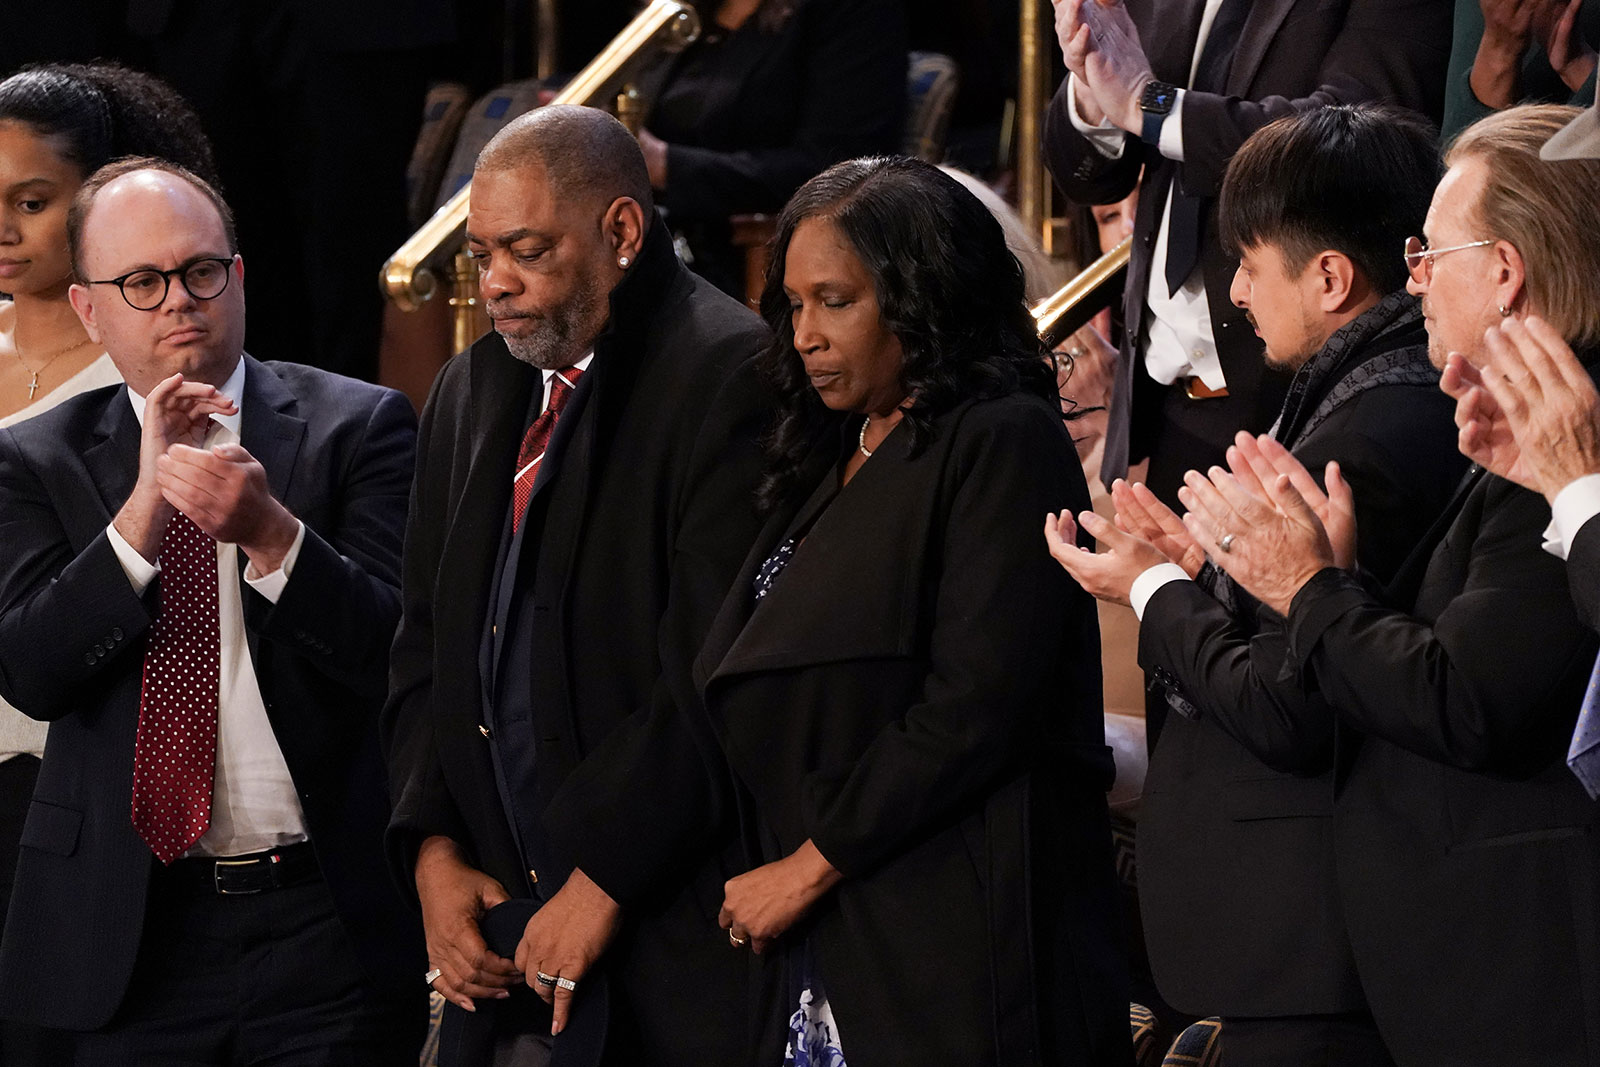 Rodney and RowVaugh Wells, the parents of Tyre Nichols, receive a standing ovation during Biden's speech.